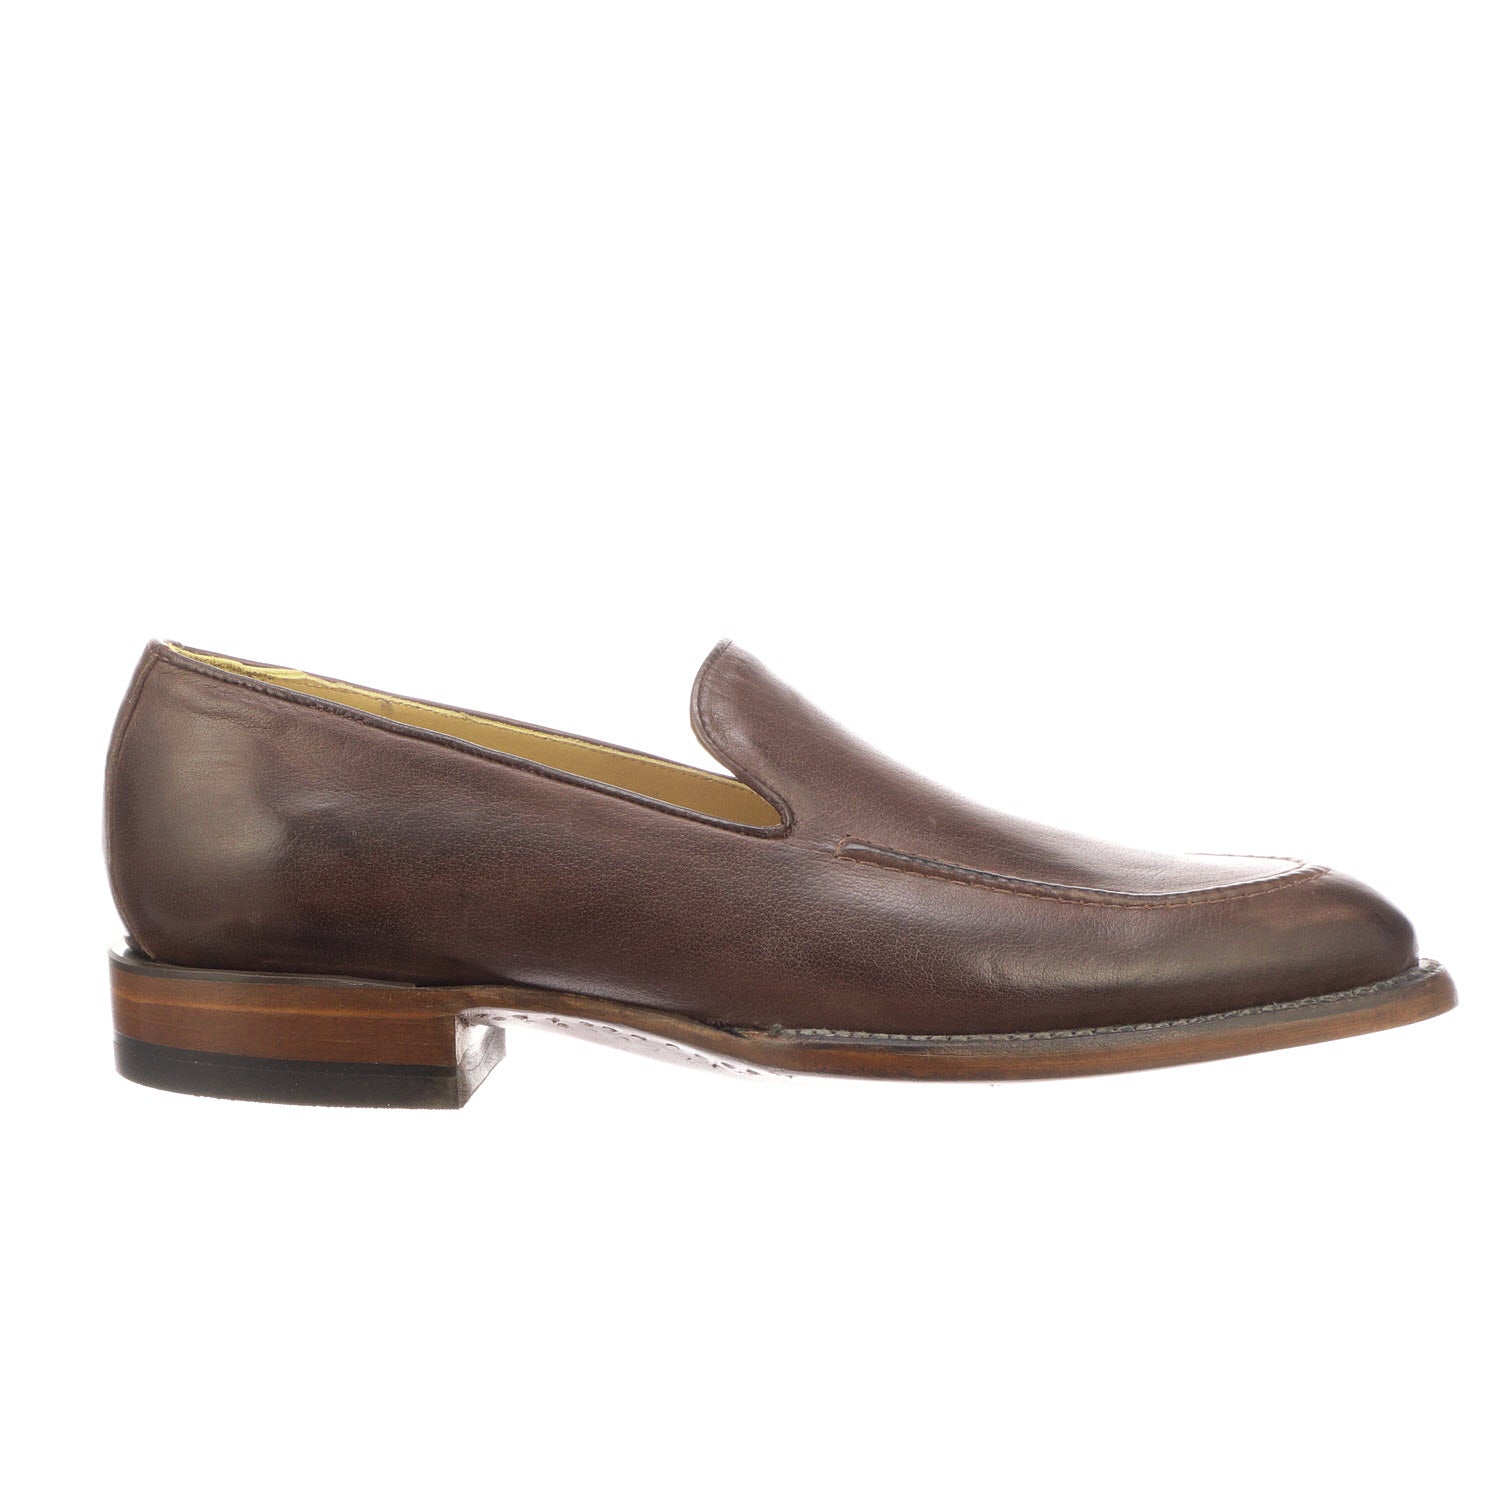 Lucchese Half Moon Loafer